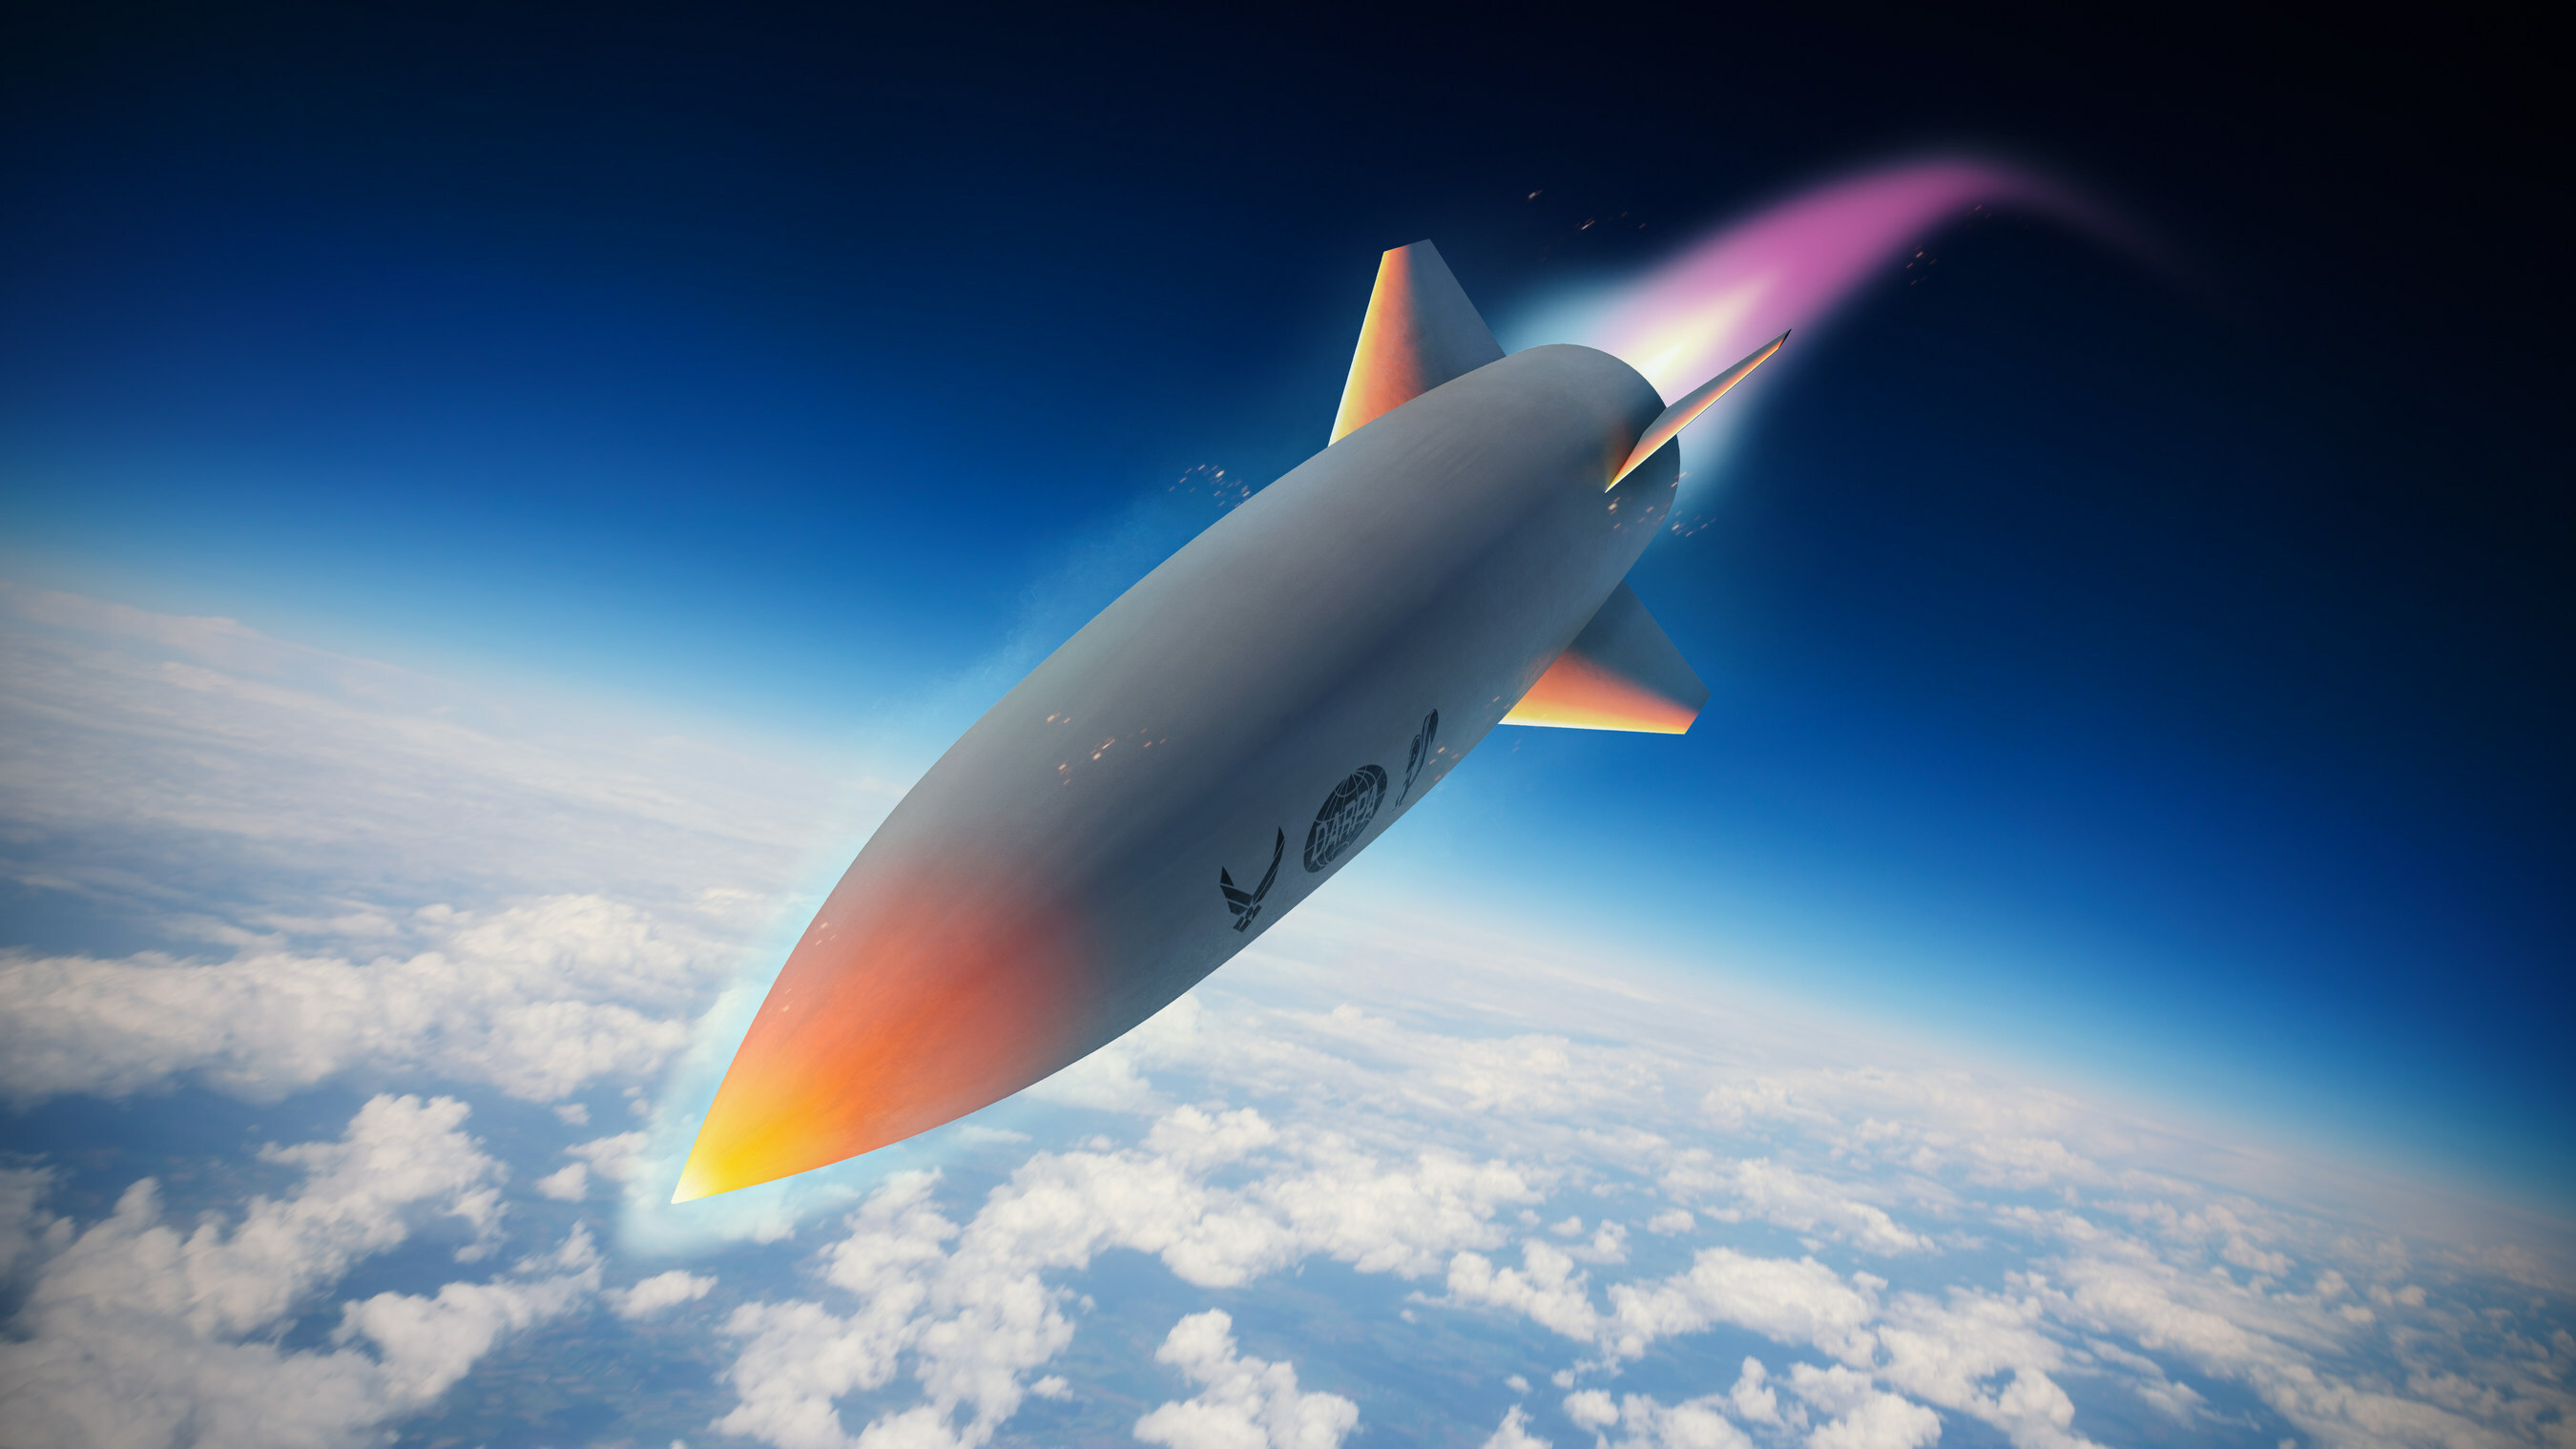 DARPA, AFRL, Lockheed Martin And Aerojet Rocketdyne Team`s Second Hypersonic Air-Breathing Weapon Concept Launched From B-52 Accomplishes All Test Objectives